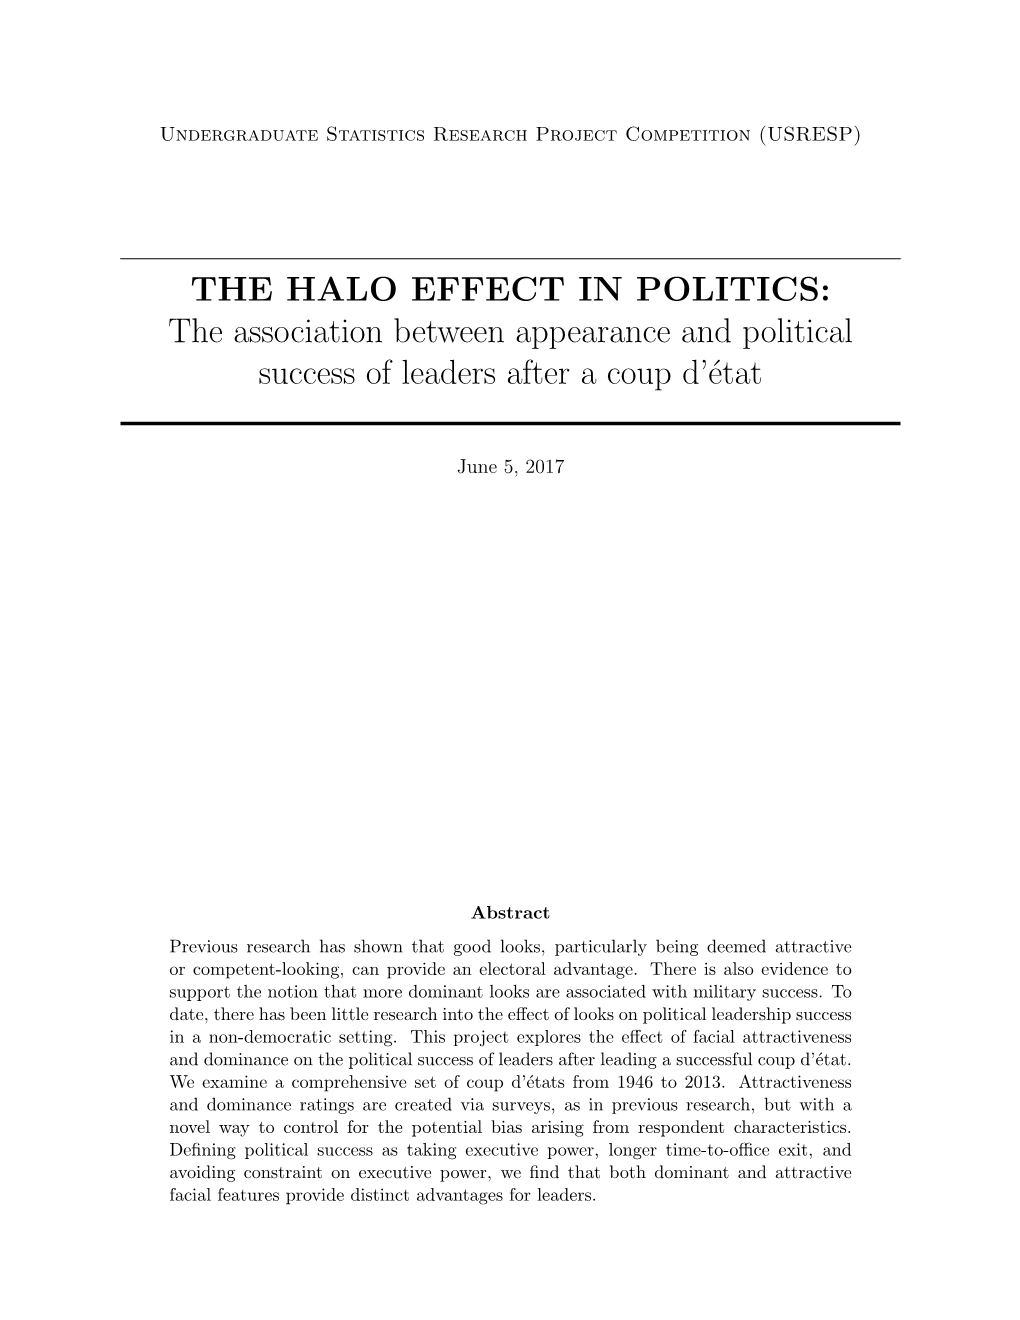 THE HALO EFFECT in POLITICS: the Association Between Appearance and Political Success of Leaders After a Coup D’´Etat